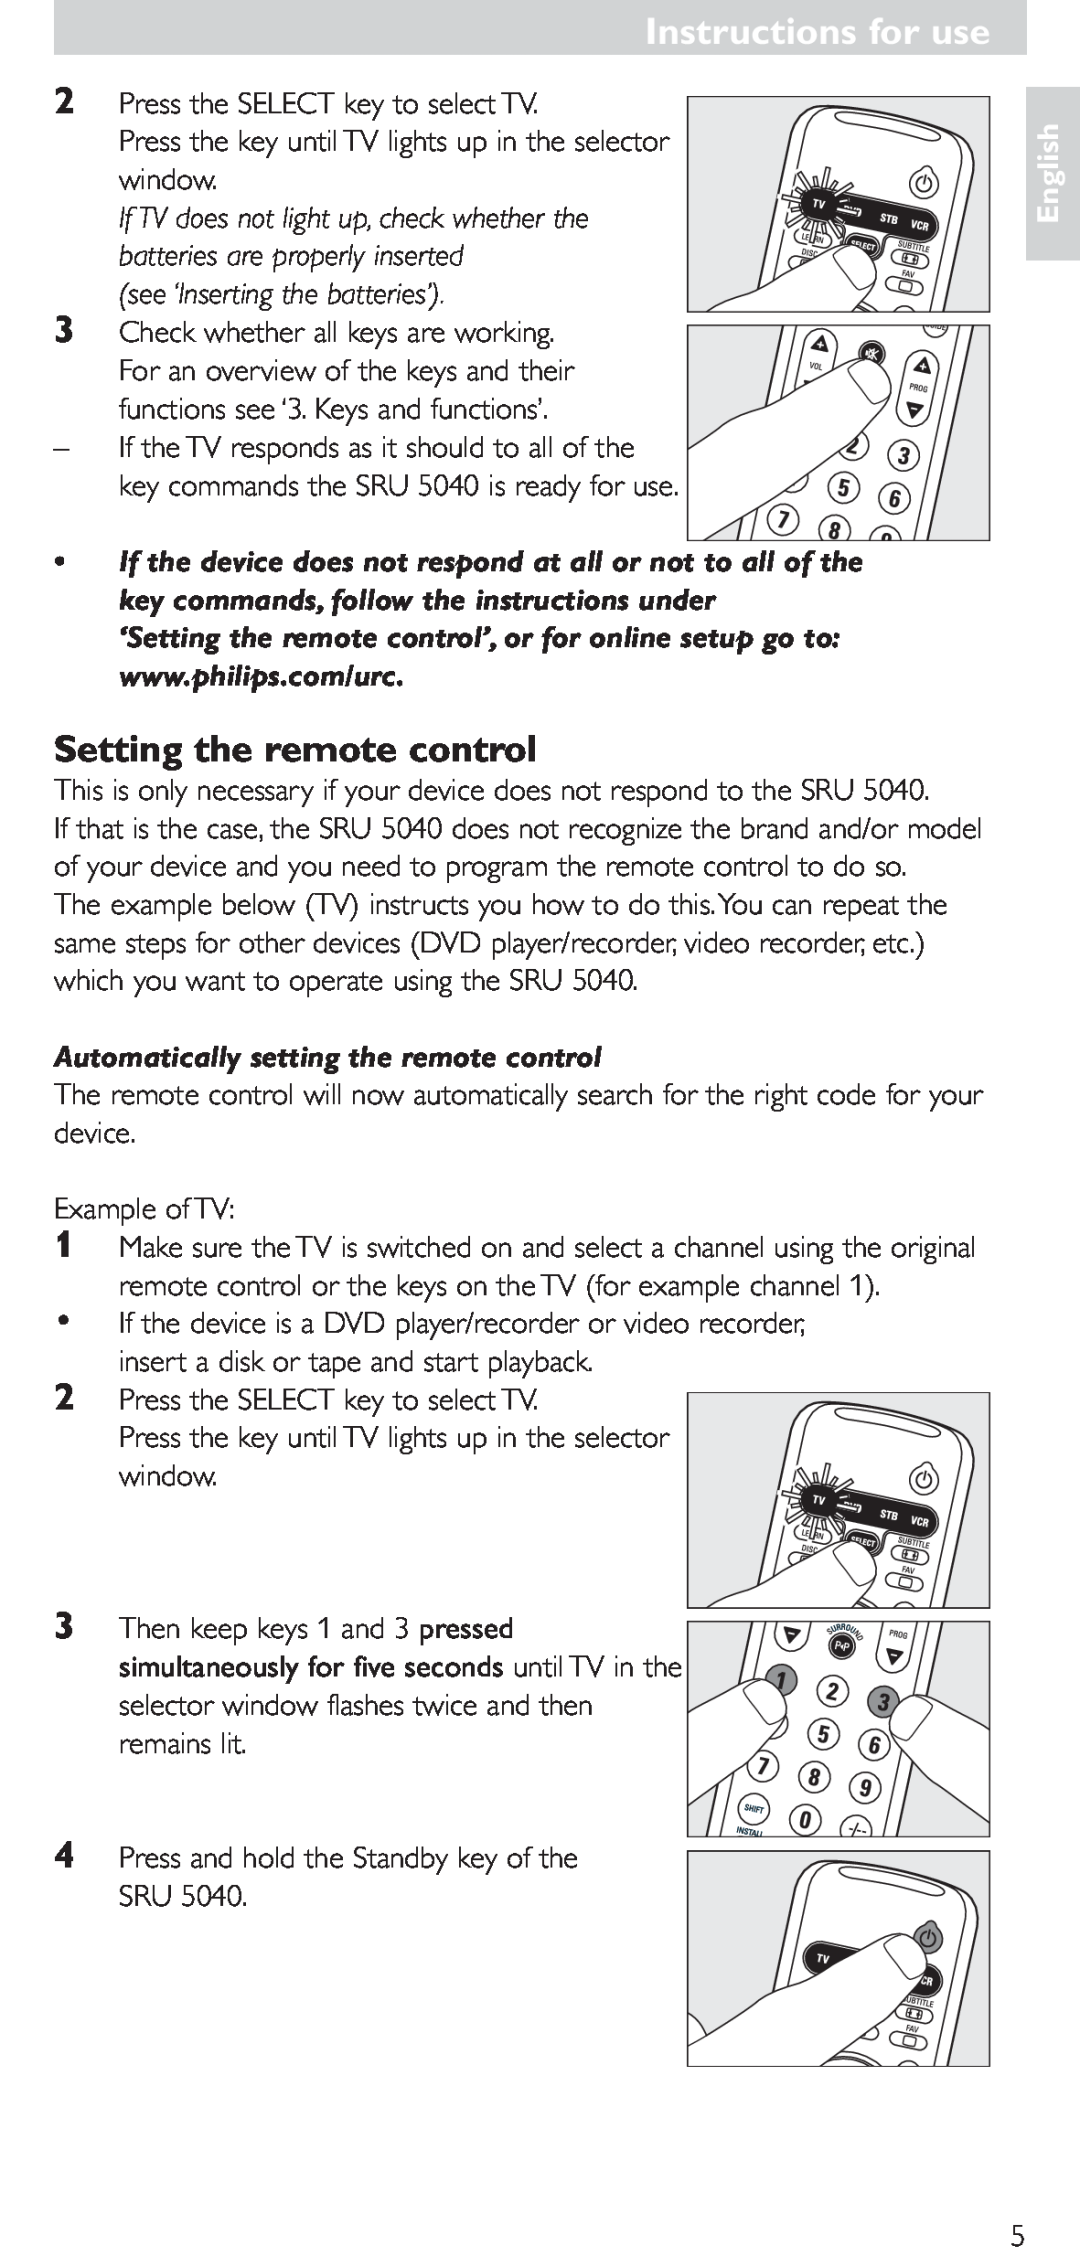 Hitachi SRU 5040/05 Setting the remote control, see ‘Inserting the batteries’, Automatically setting the remote control 